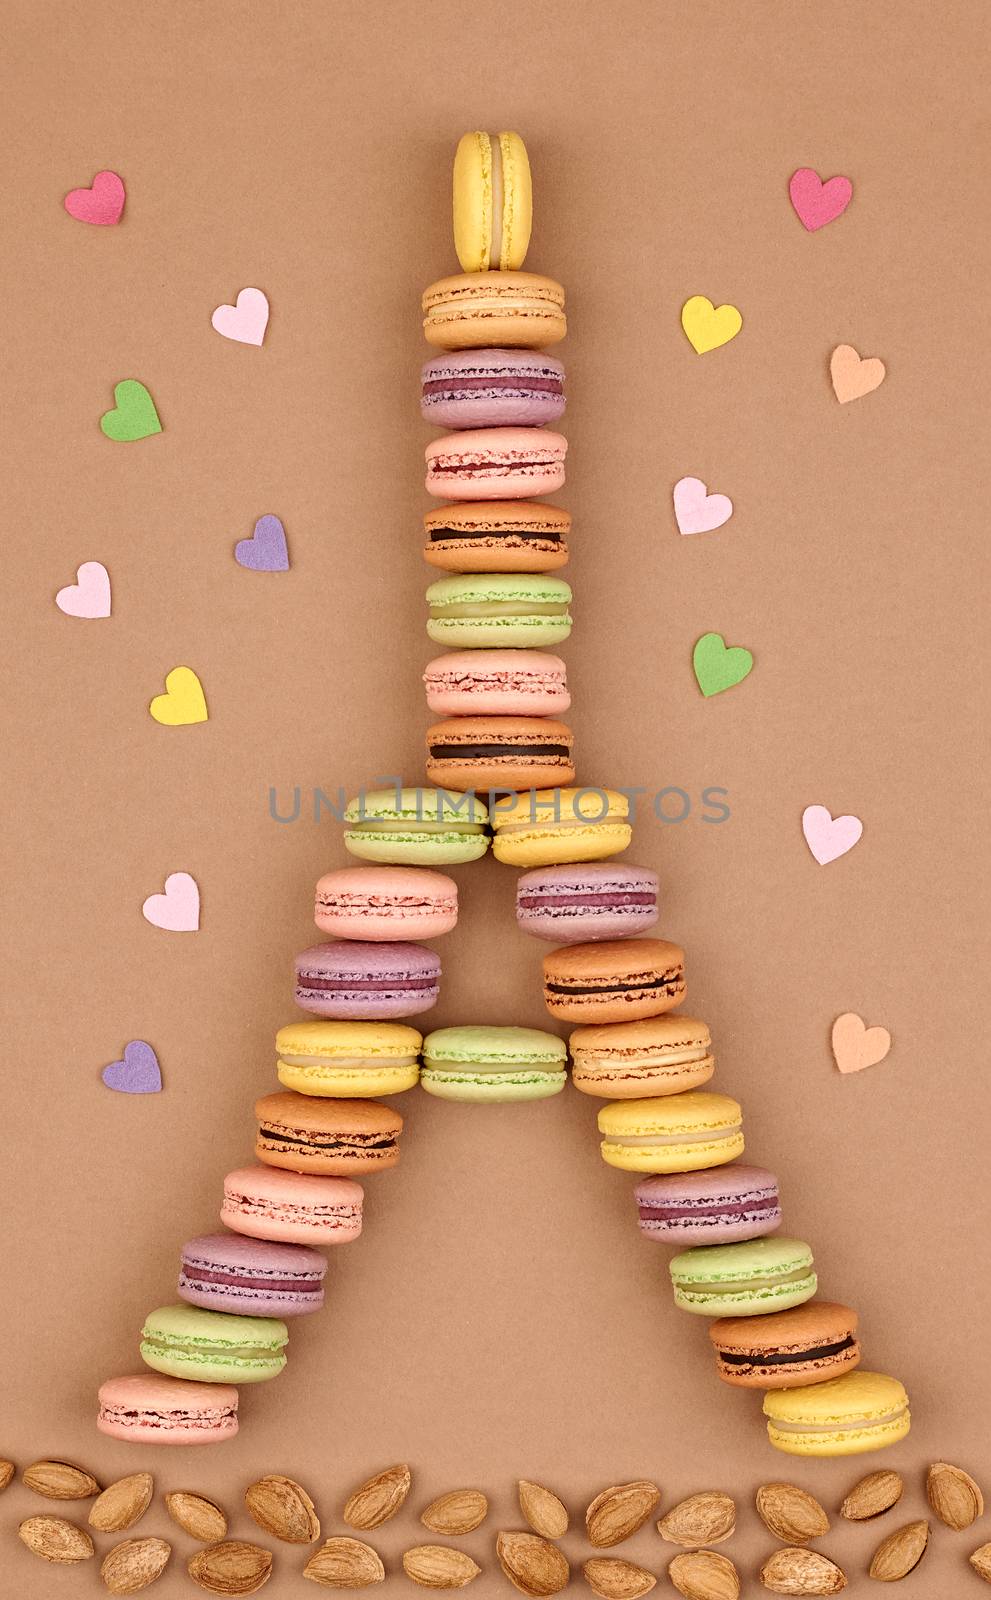 Macarons Eiffel Tower french sweet colorful,multicolored hearts, almond.Fresh pastel dessert on chocolate retro vintage background. Love,Valentines Day,romantic                                       